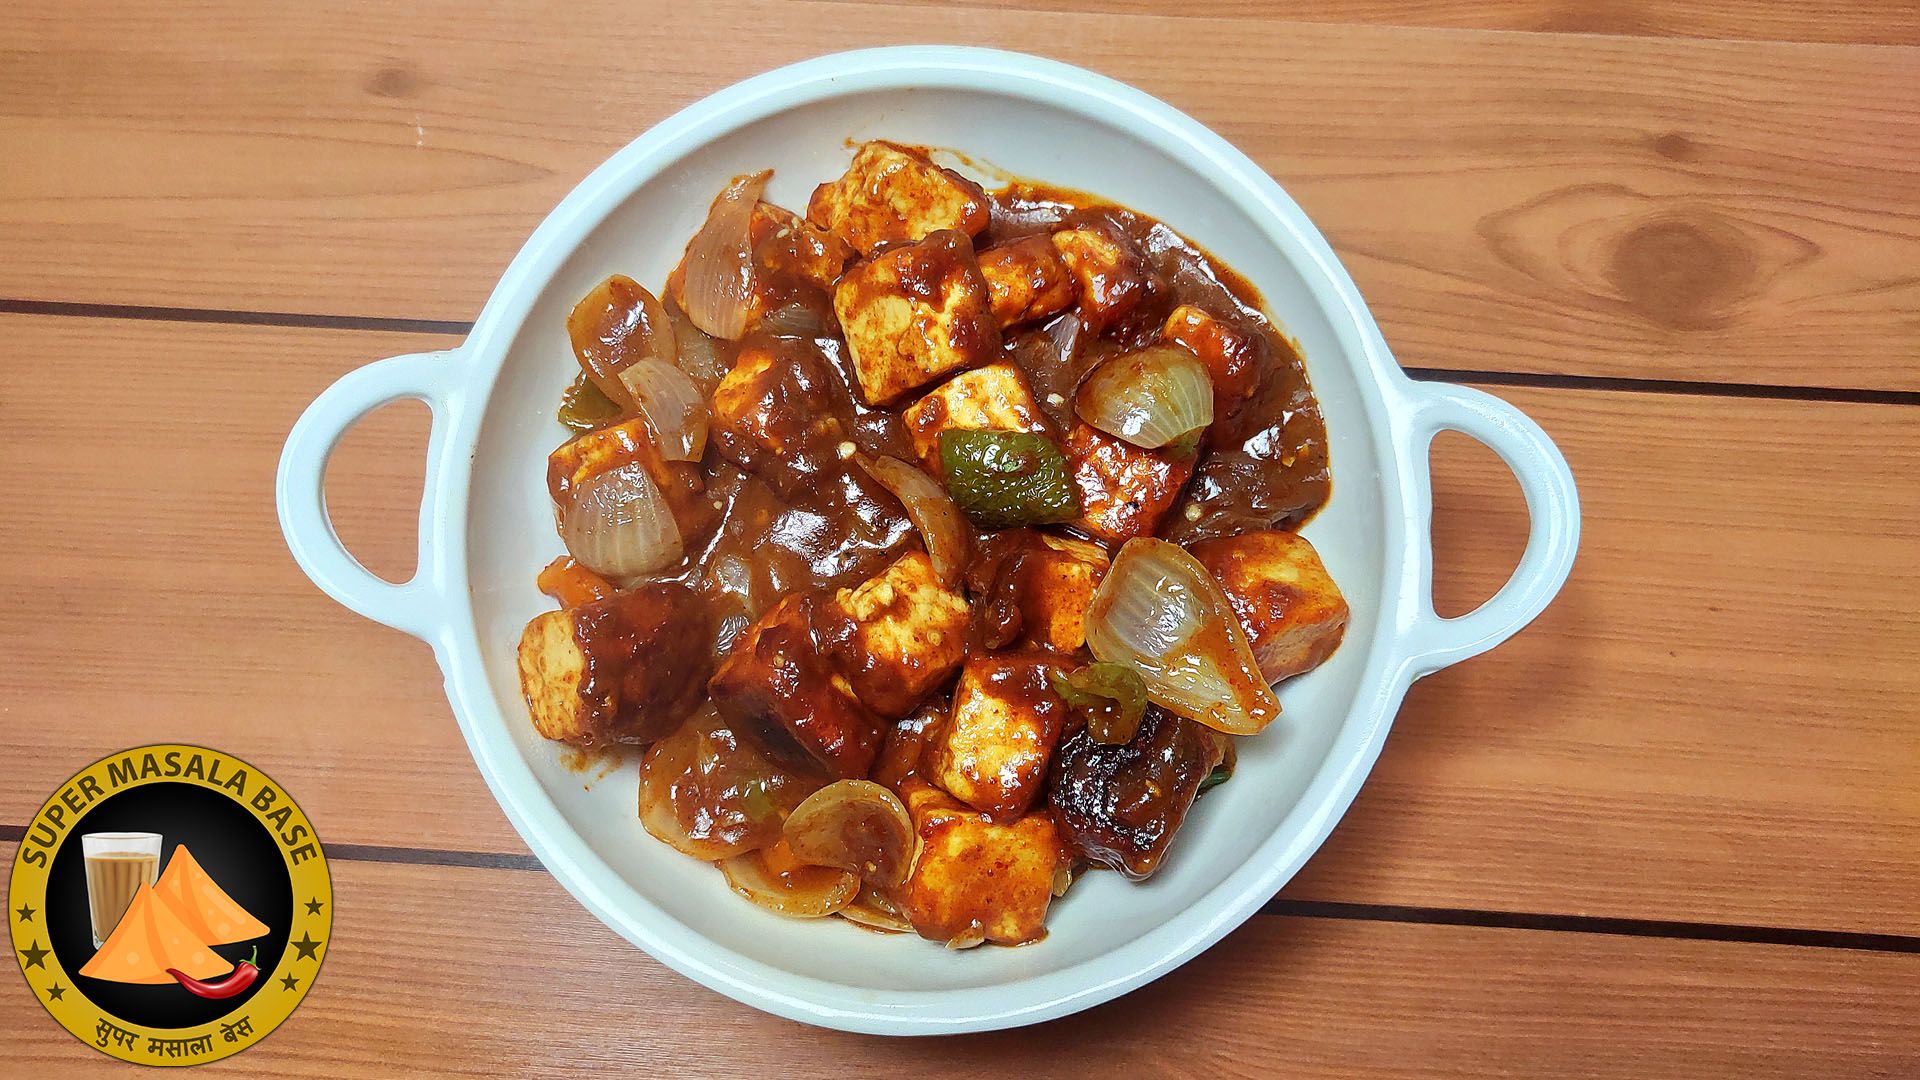 chilli paneer cottage cheese in hot sauce mixed with onions capsicum pieces